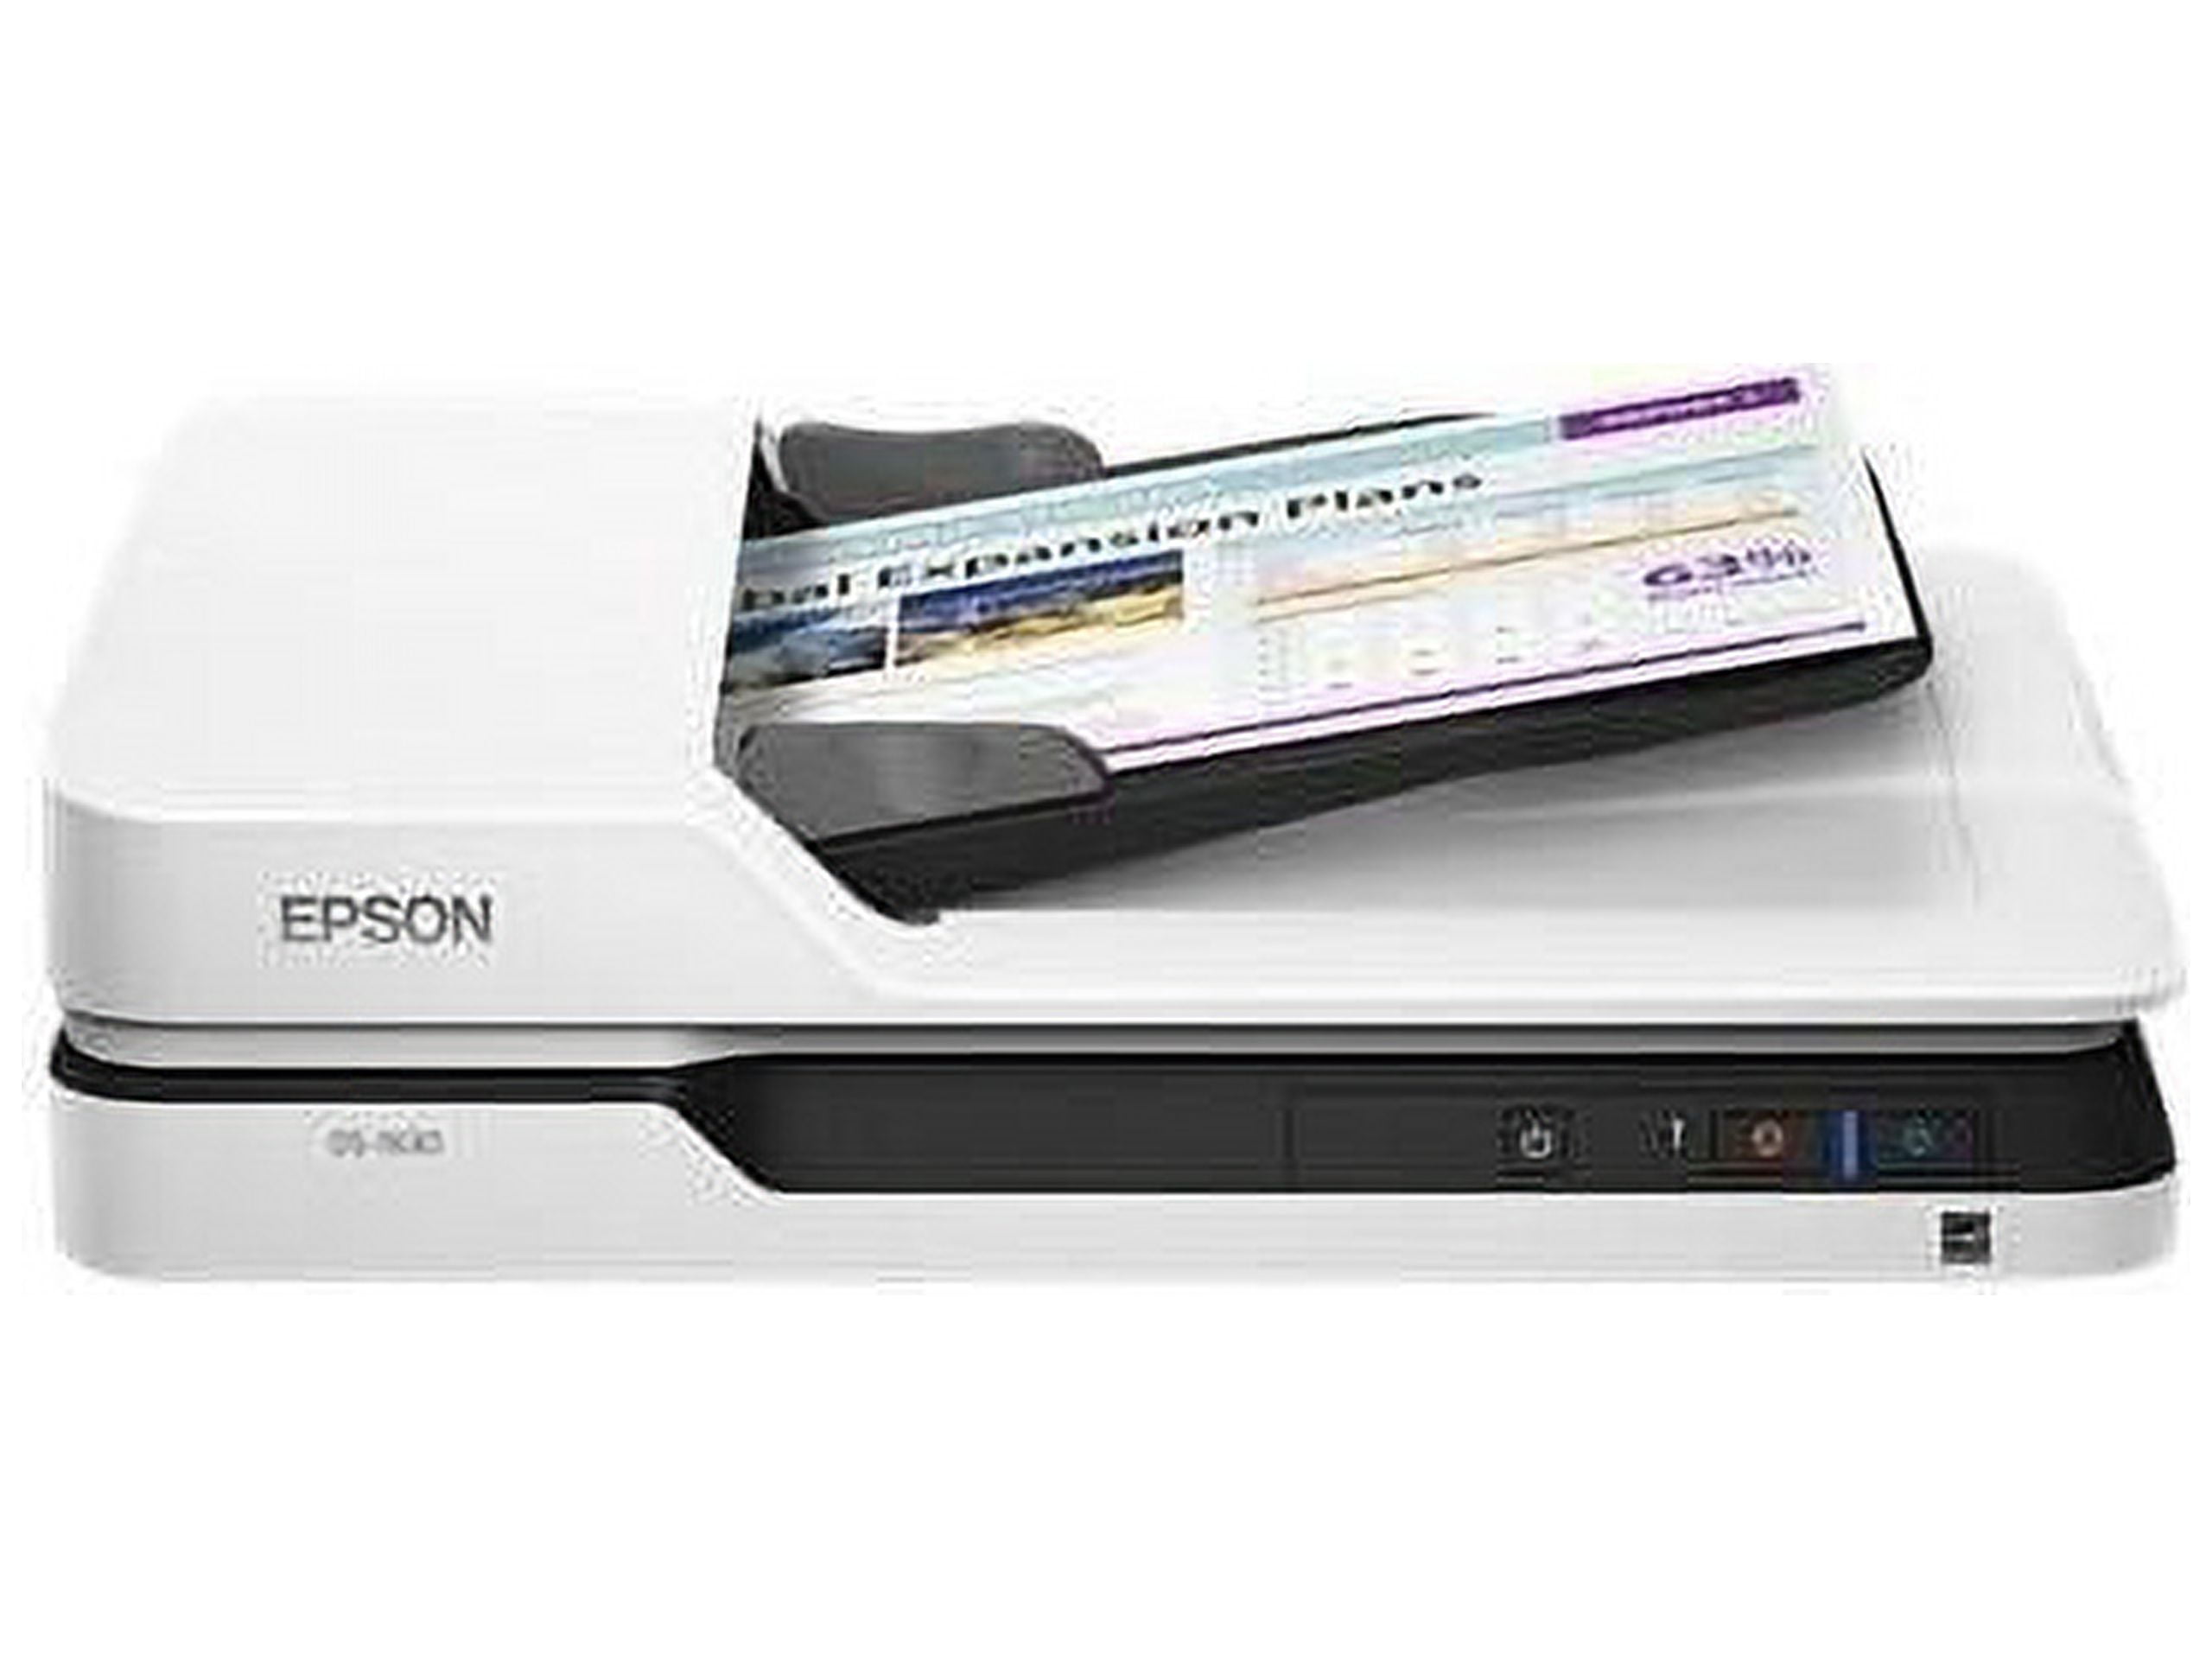 Picture of Epson America B11B239201 Flatbed Color Document Scanner